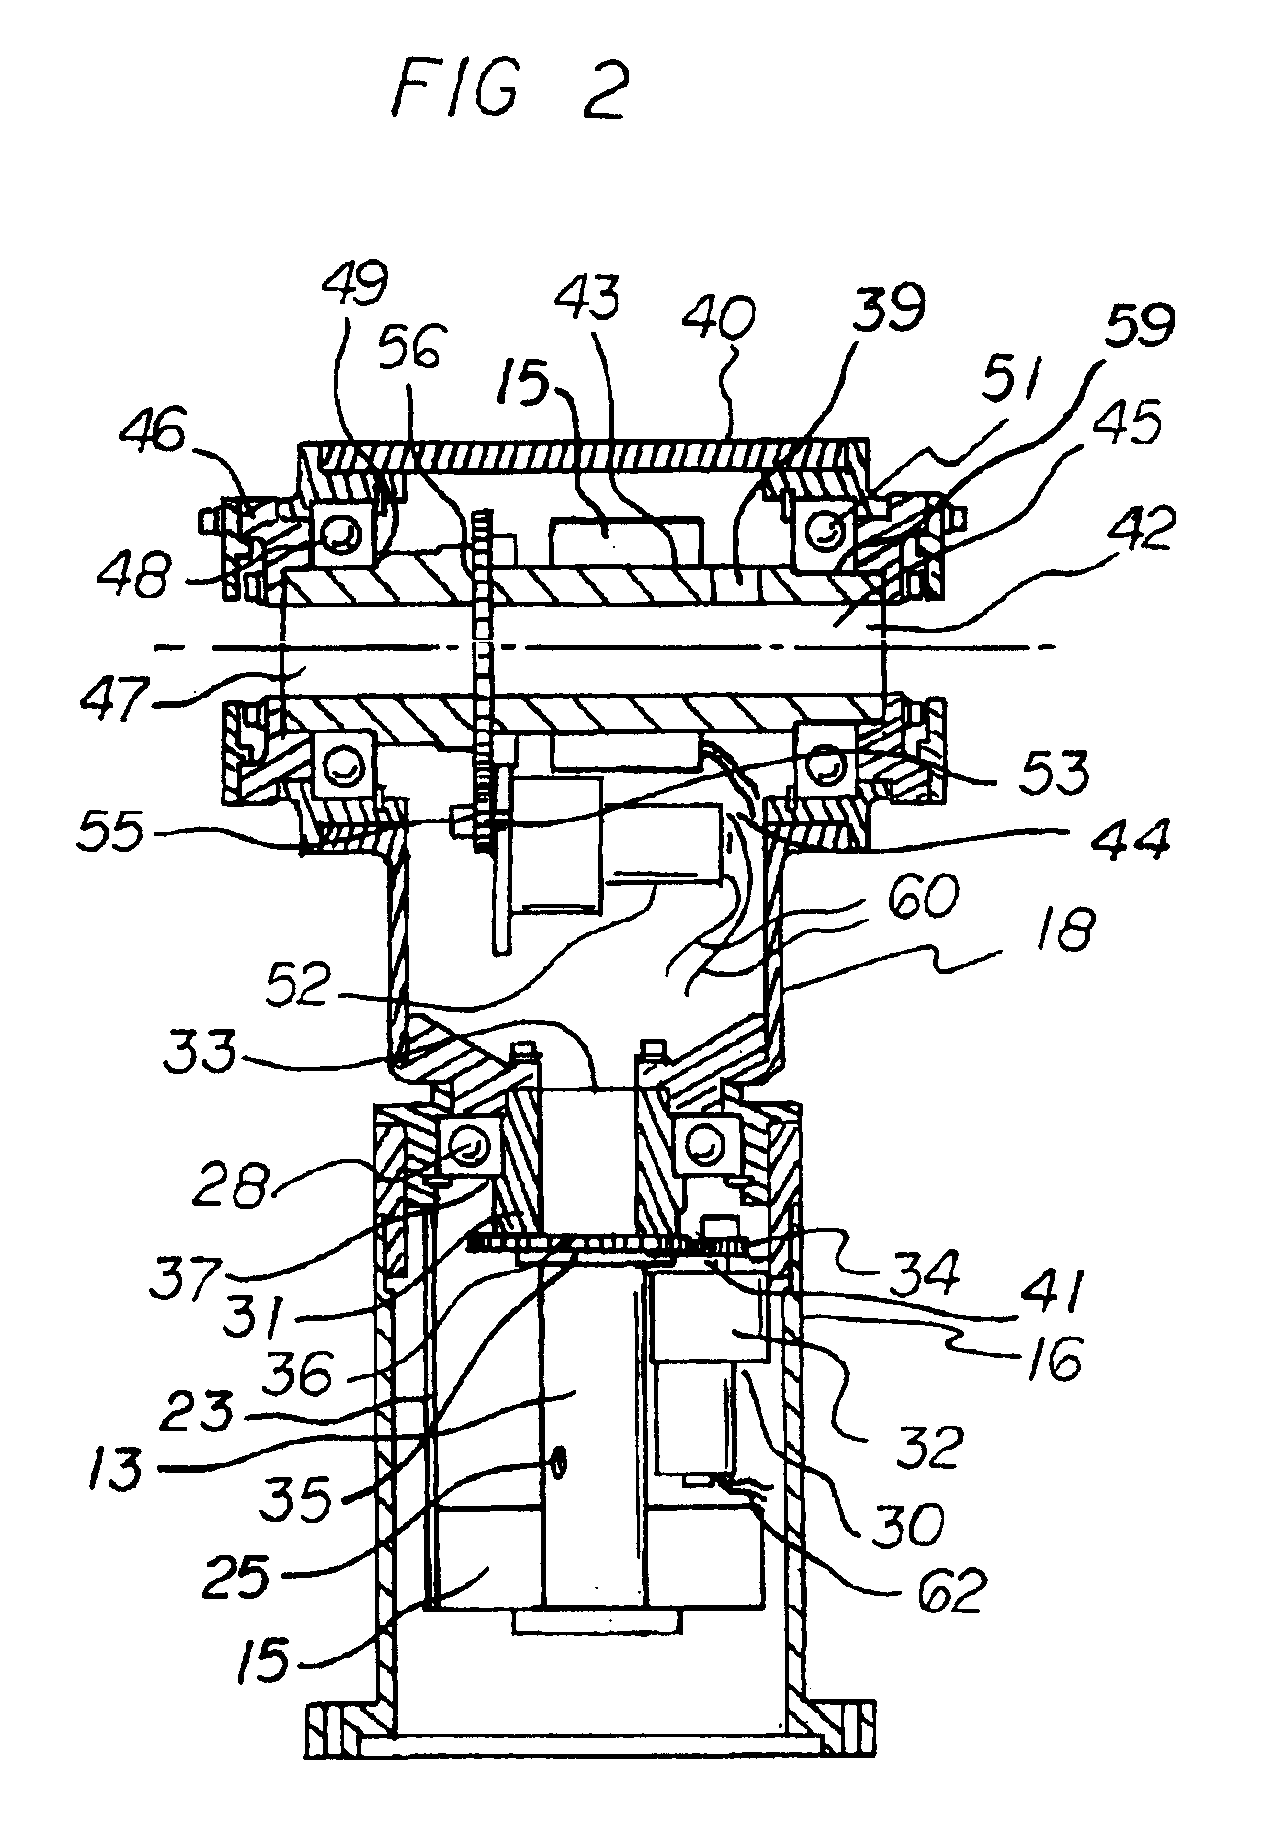 Pedestal system and method of controlling rotational and bearing stiffness